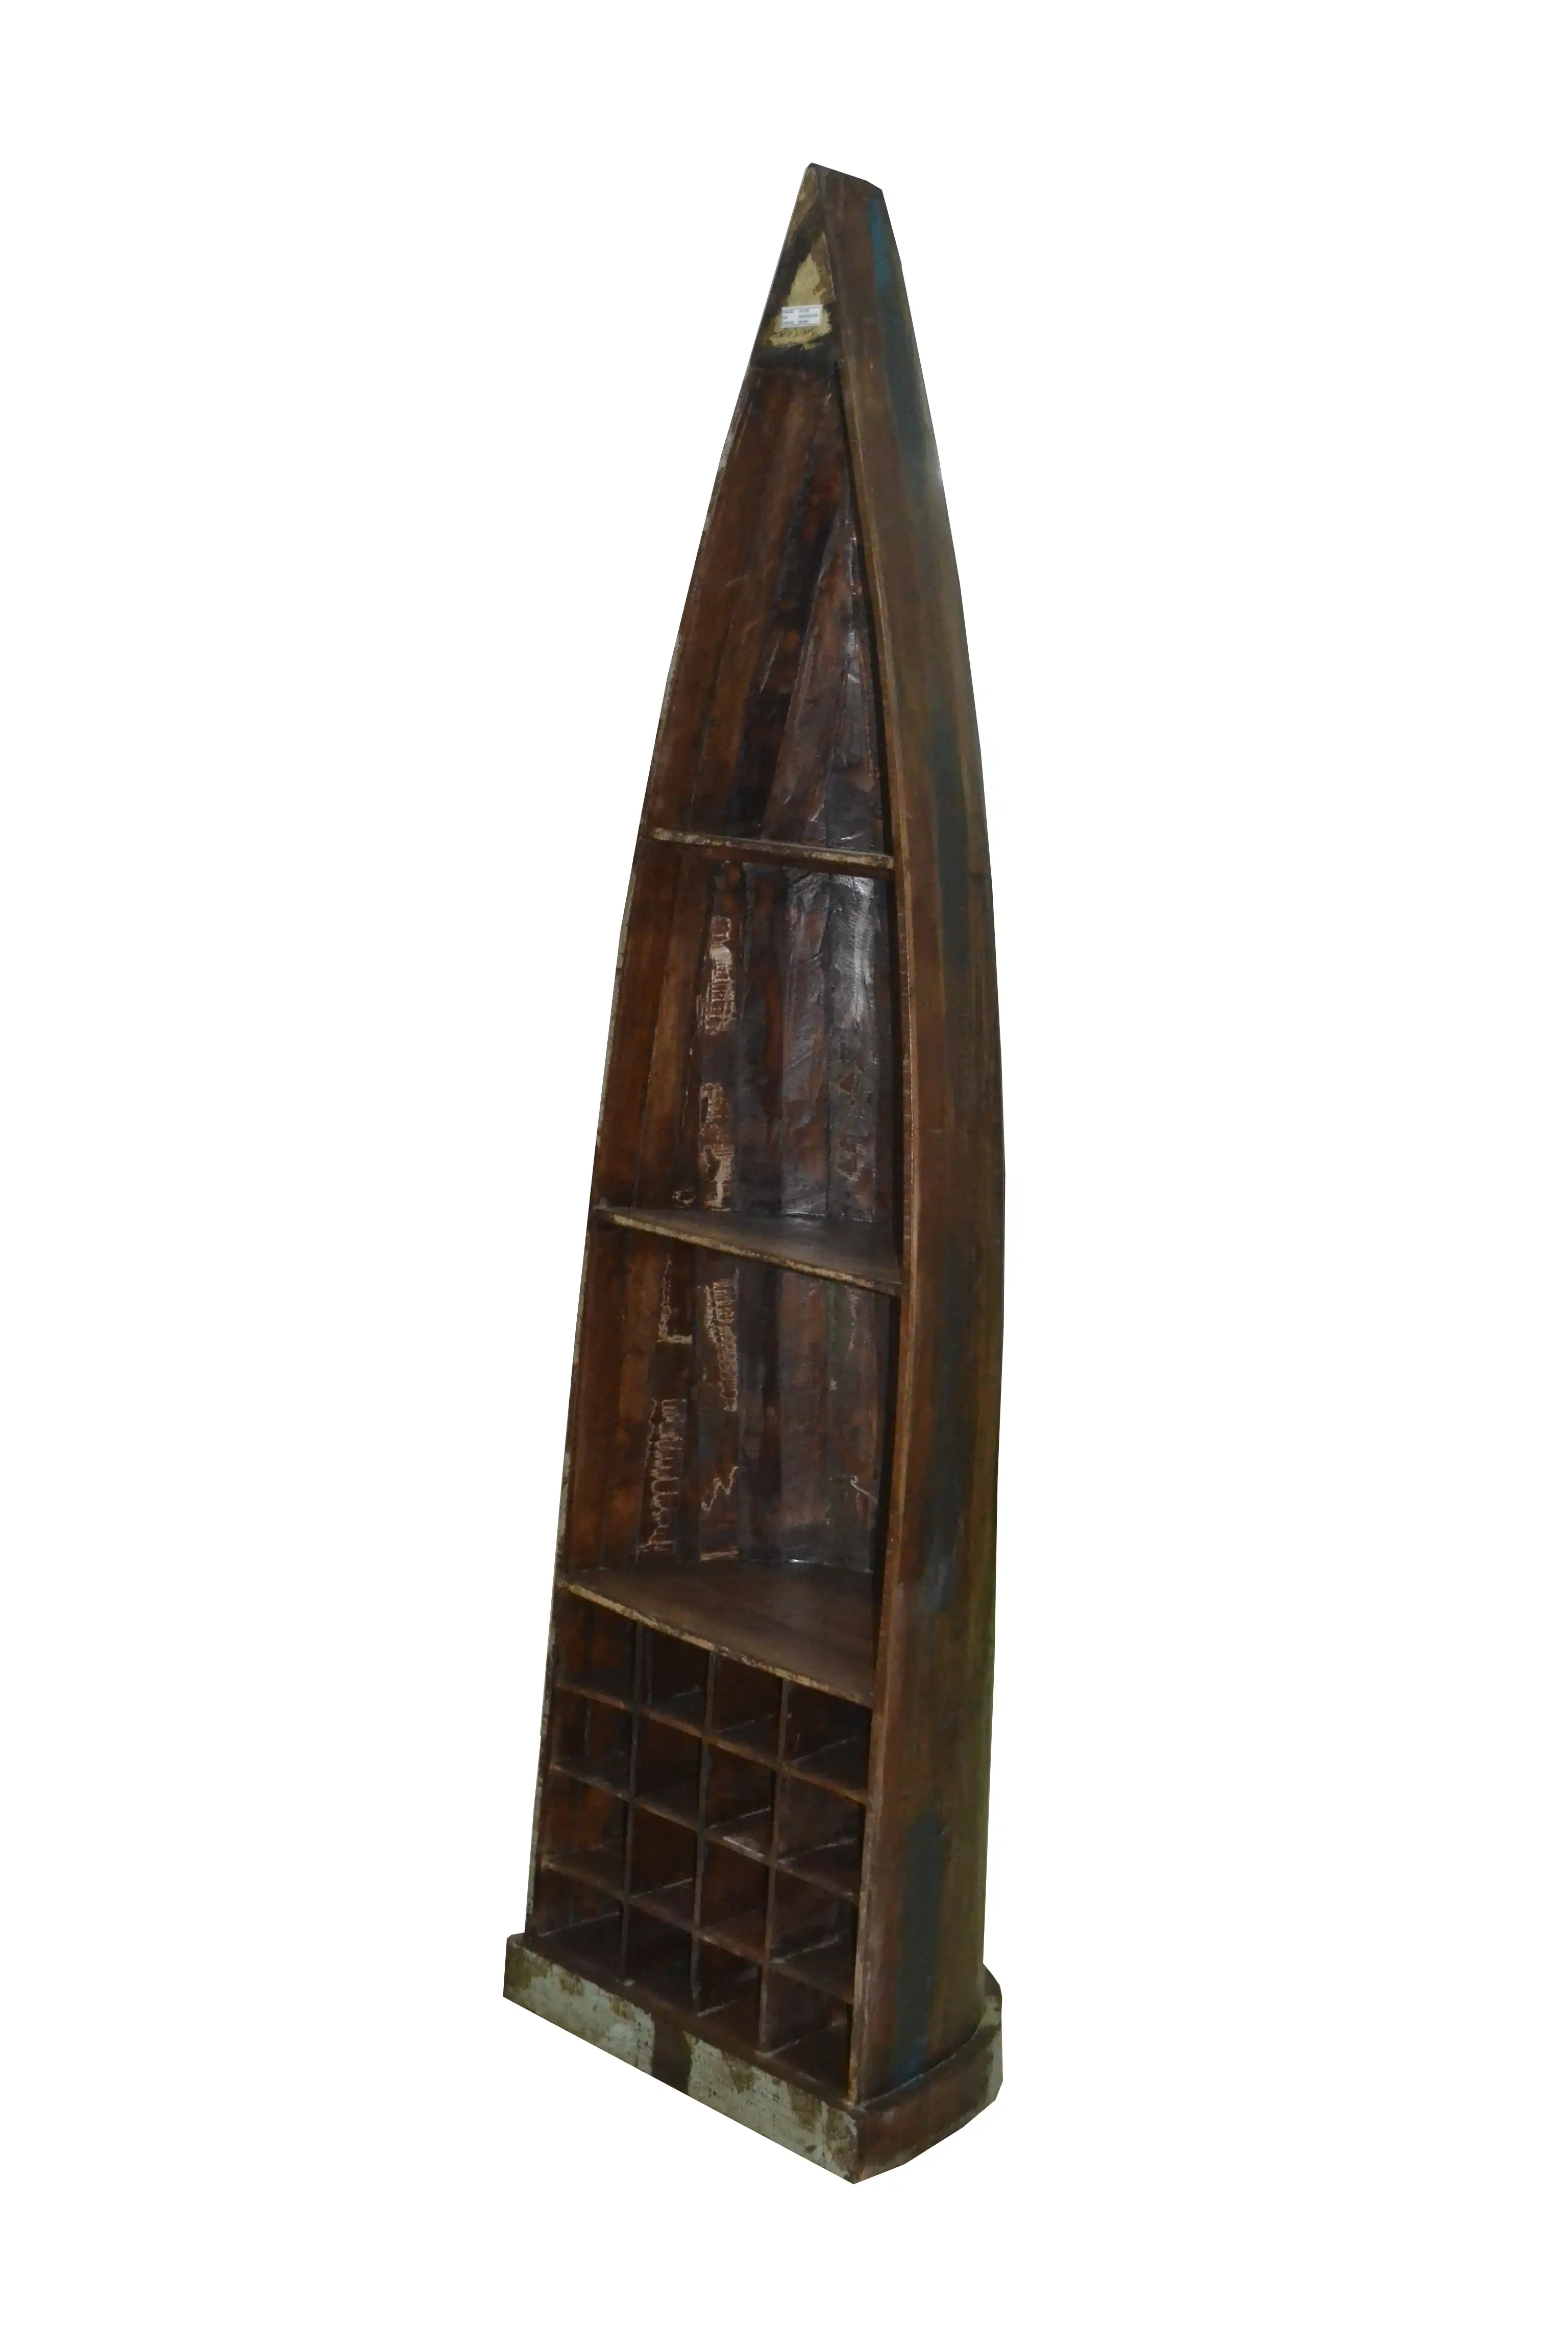 Reclaimed Wood Boat Bookcase with Winerack - popular handicrafts